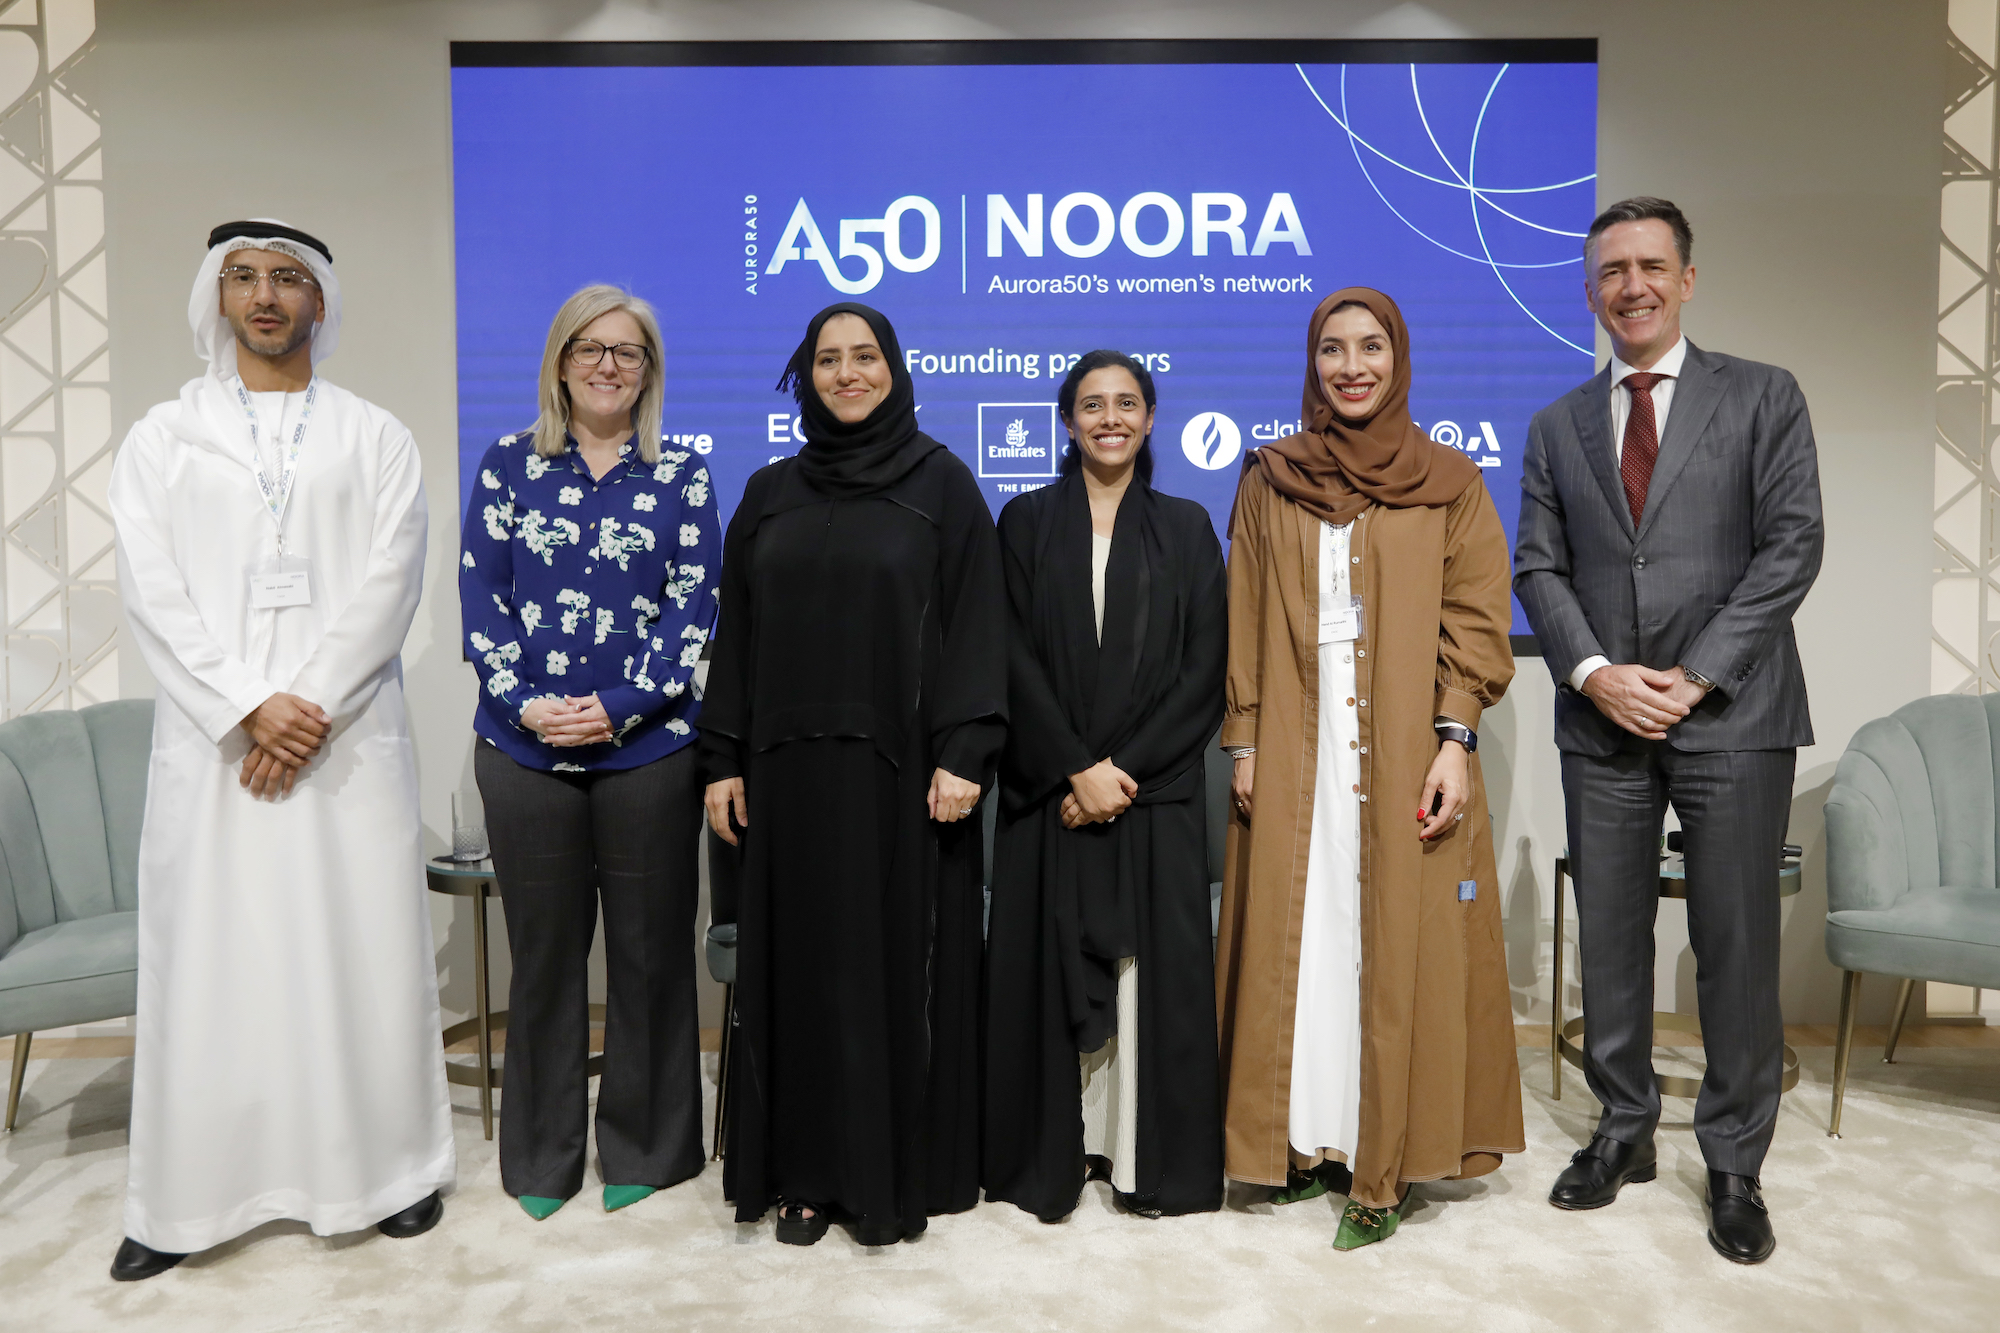 The launch of corporate women's network NOORA on 31 July 2023 at the Women's Pavillion, Expo City, Dubai. From left to right: Nabil Almessabi, Chief Human Resources Officer, TAQA; Diana Wilde, co-founder, Aurora50; Nadya Abdulla Kamali, Country Managing Director, UAE, Accenture; Laila Saif, Director, Human Capital Strategy & Operations, EGA; Hend Al Rumaithi, Senior Director, Group Internal Audit & Chief Ethics & Compliance Officer, ENOC; and Oliver Grohmann, Group Head of Human Resources, Emirates Group. Credit: Aurora50